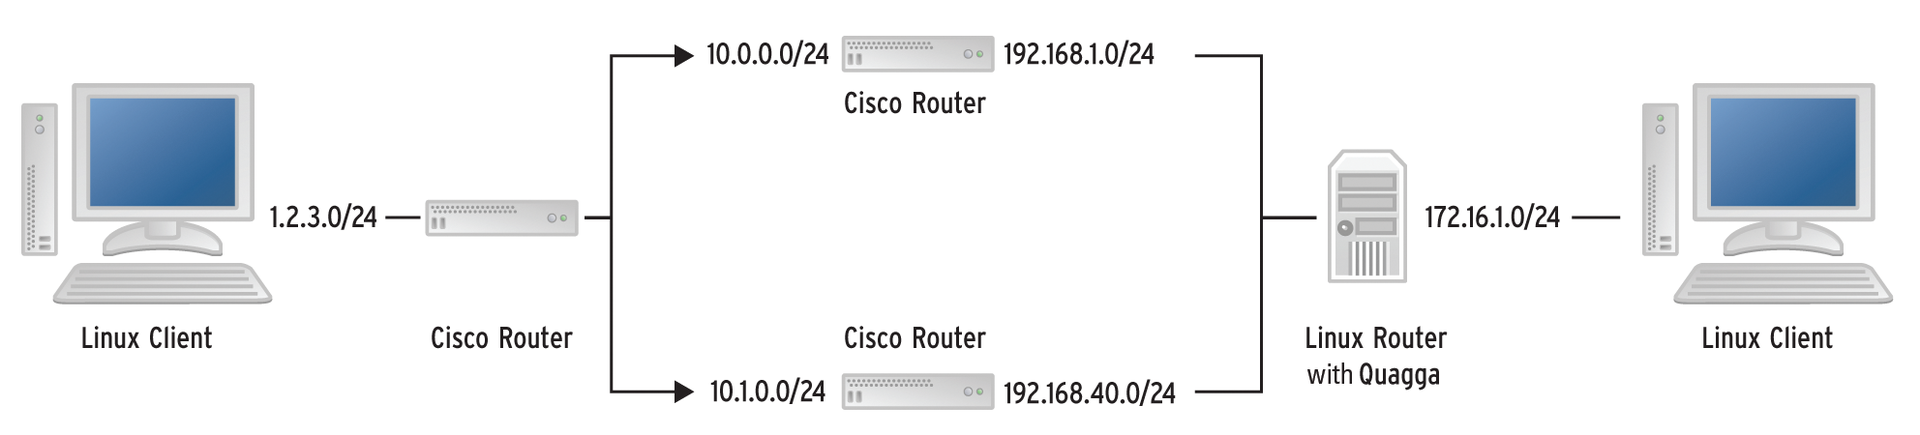 The sample network consists of two Linux clients, three software-simulated Cisco routers, and the Linux server with Quagga. 